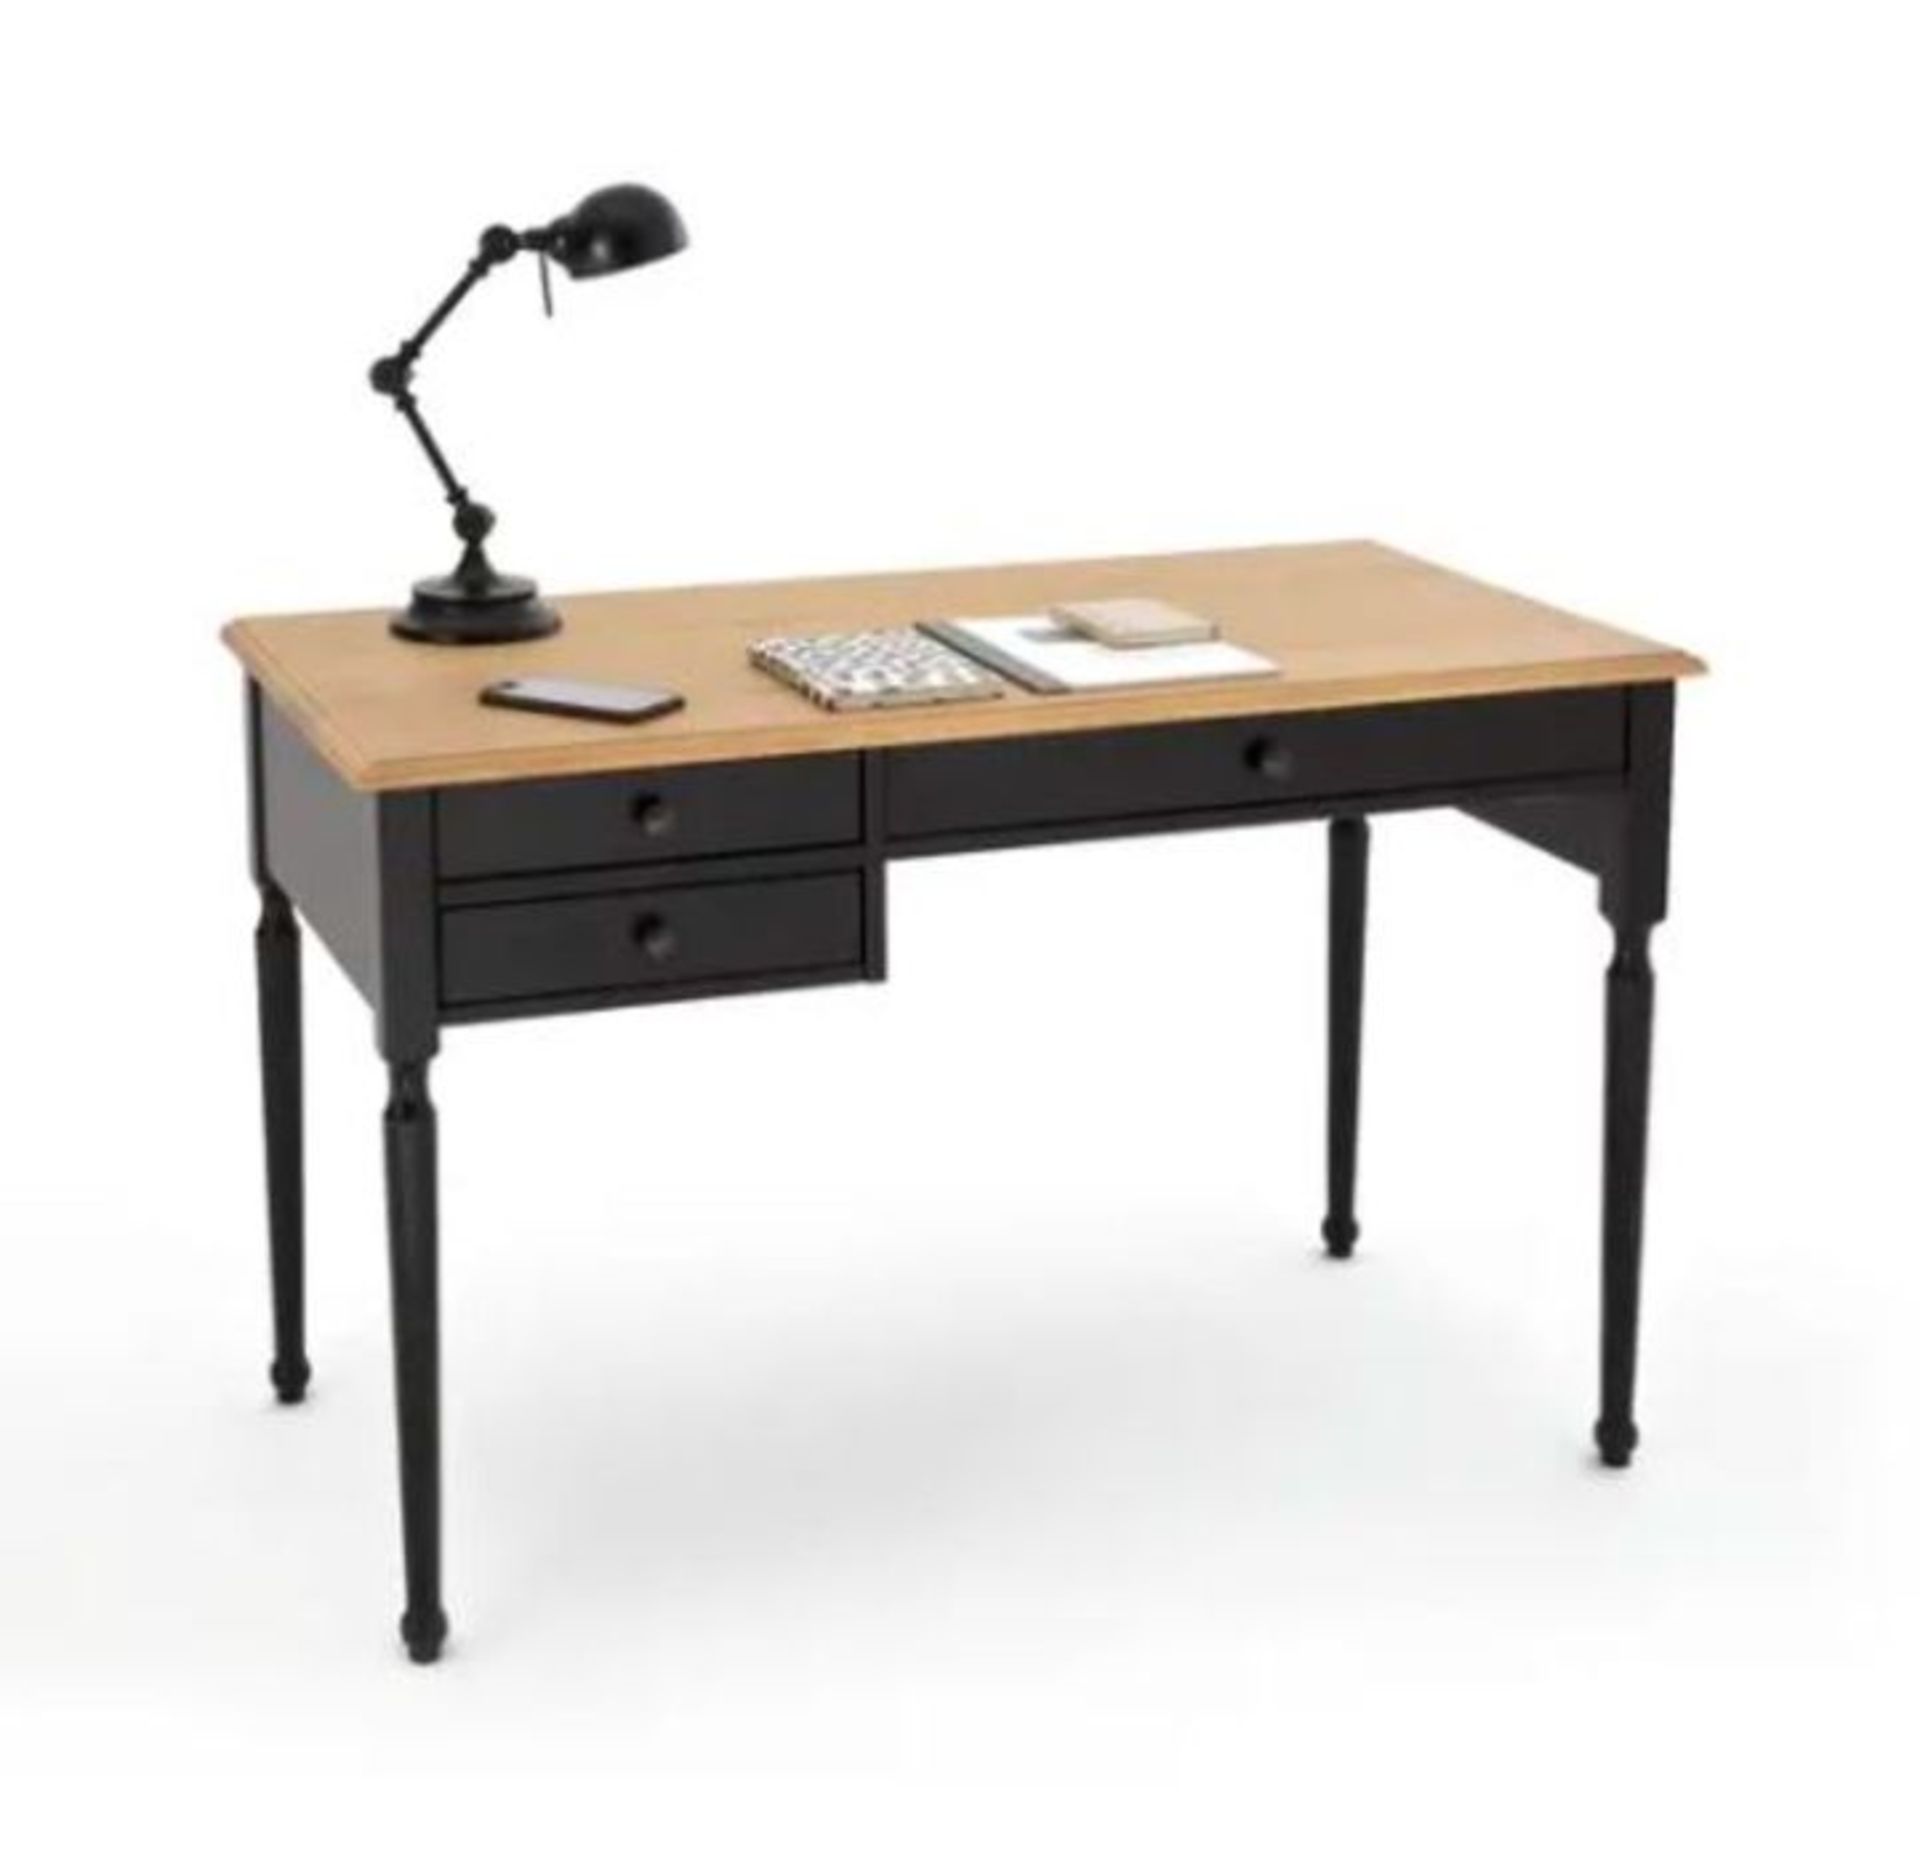 AUTHENTIC STYLE SOLID PINE DESK / RRP £350.00 / CUSTOMER RETURN GRADE A